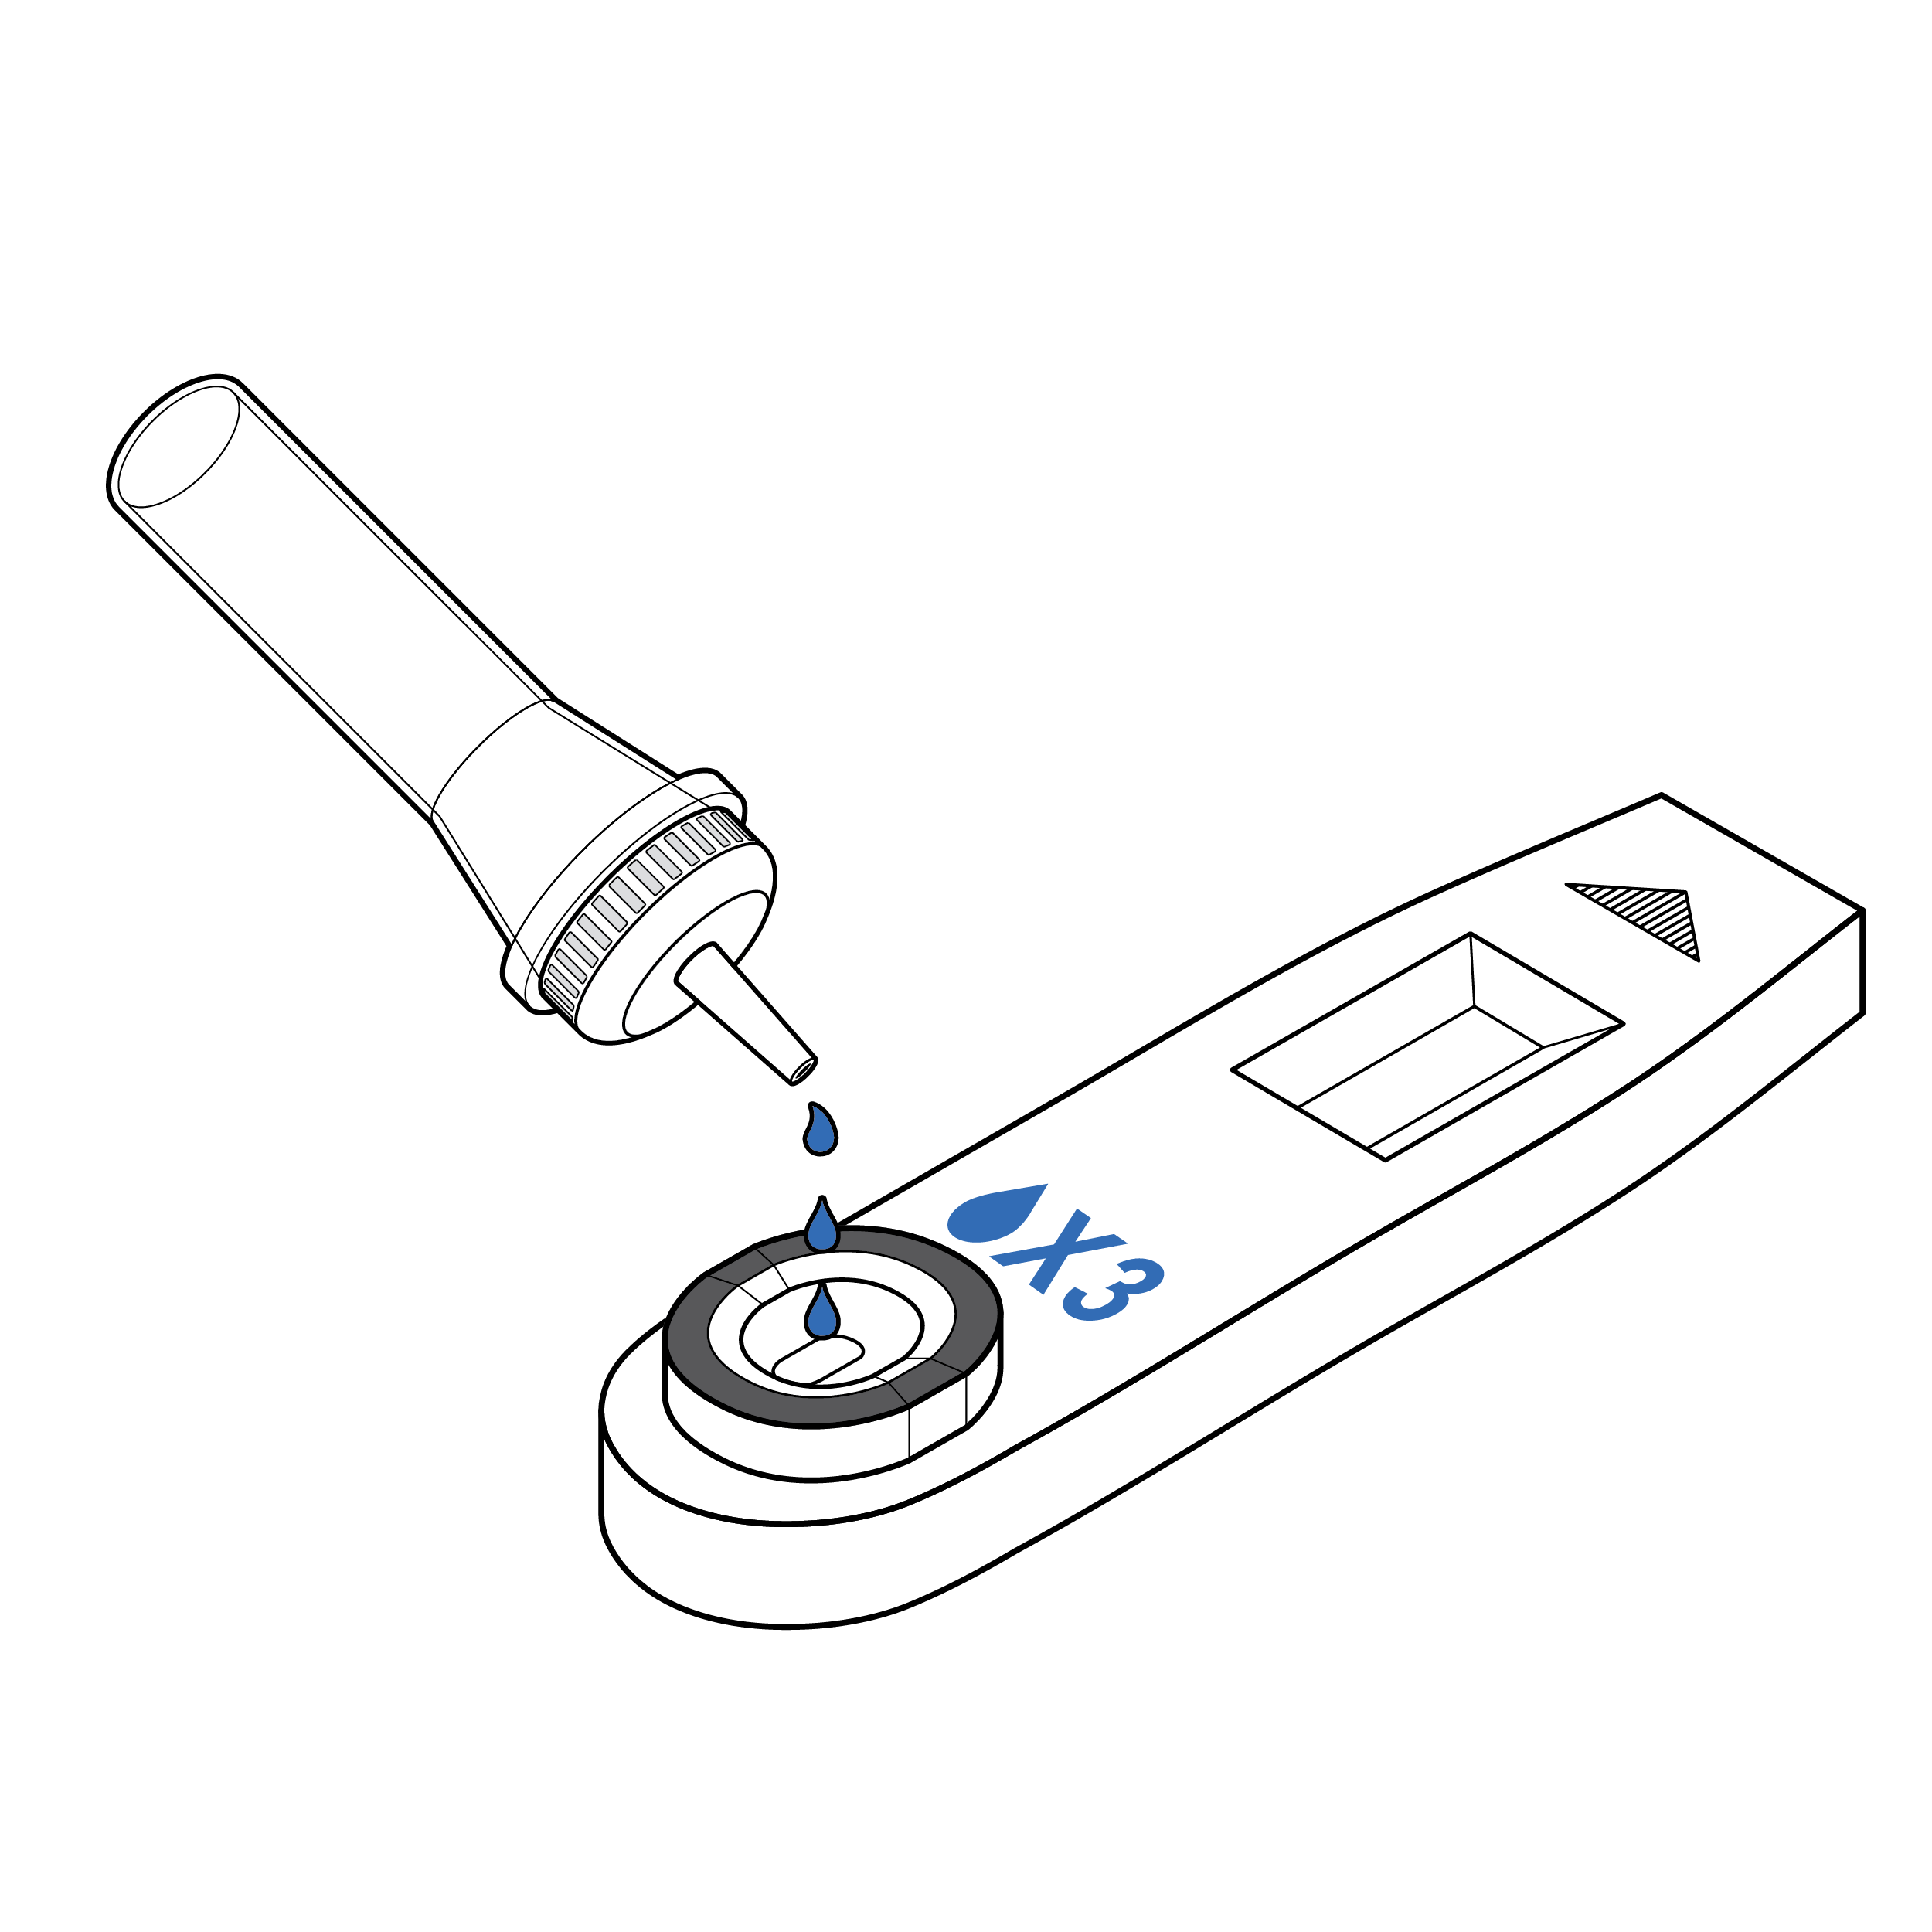 Cassette with raised feature and a dark ring around sample well. Printed above the sample well on the cassette is a droplet icon with 'X 3' next to the icon.